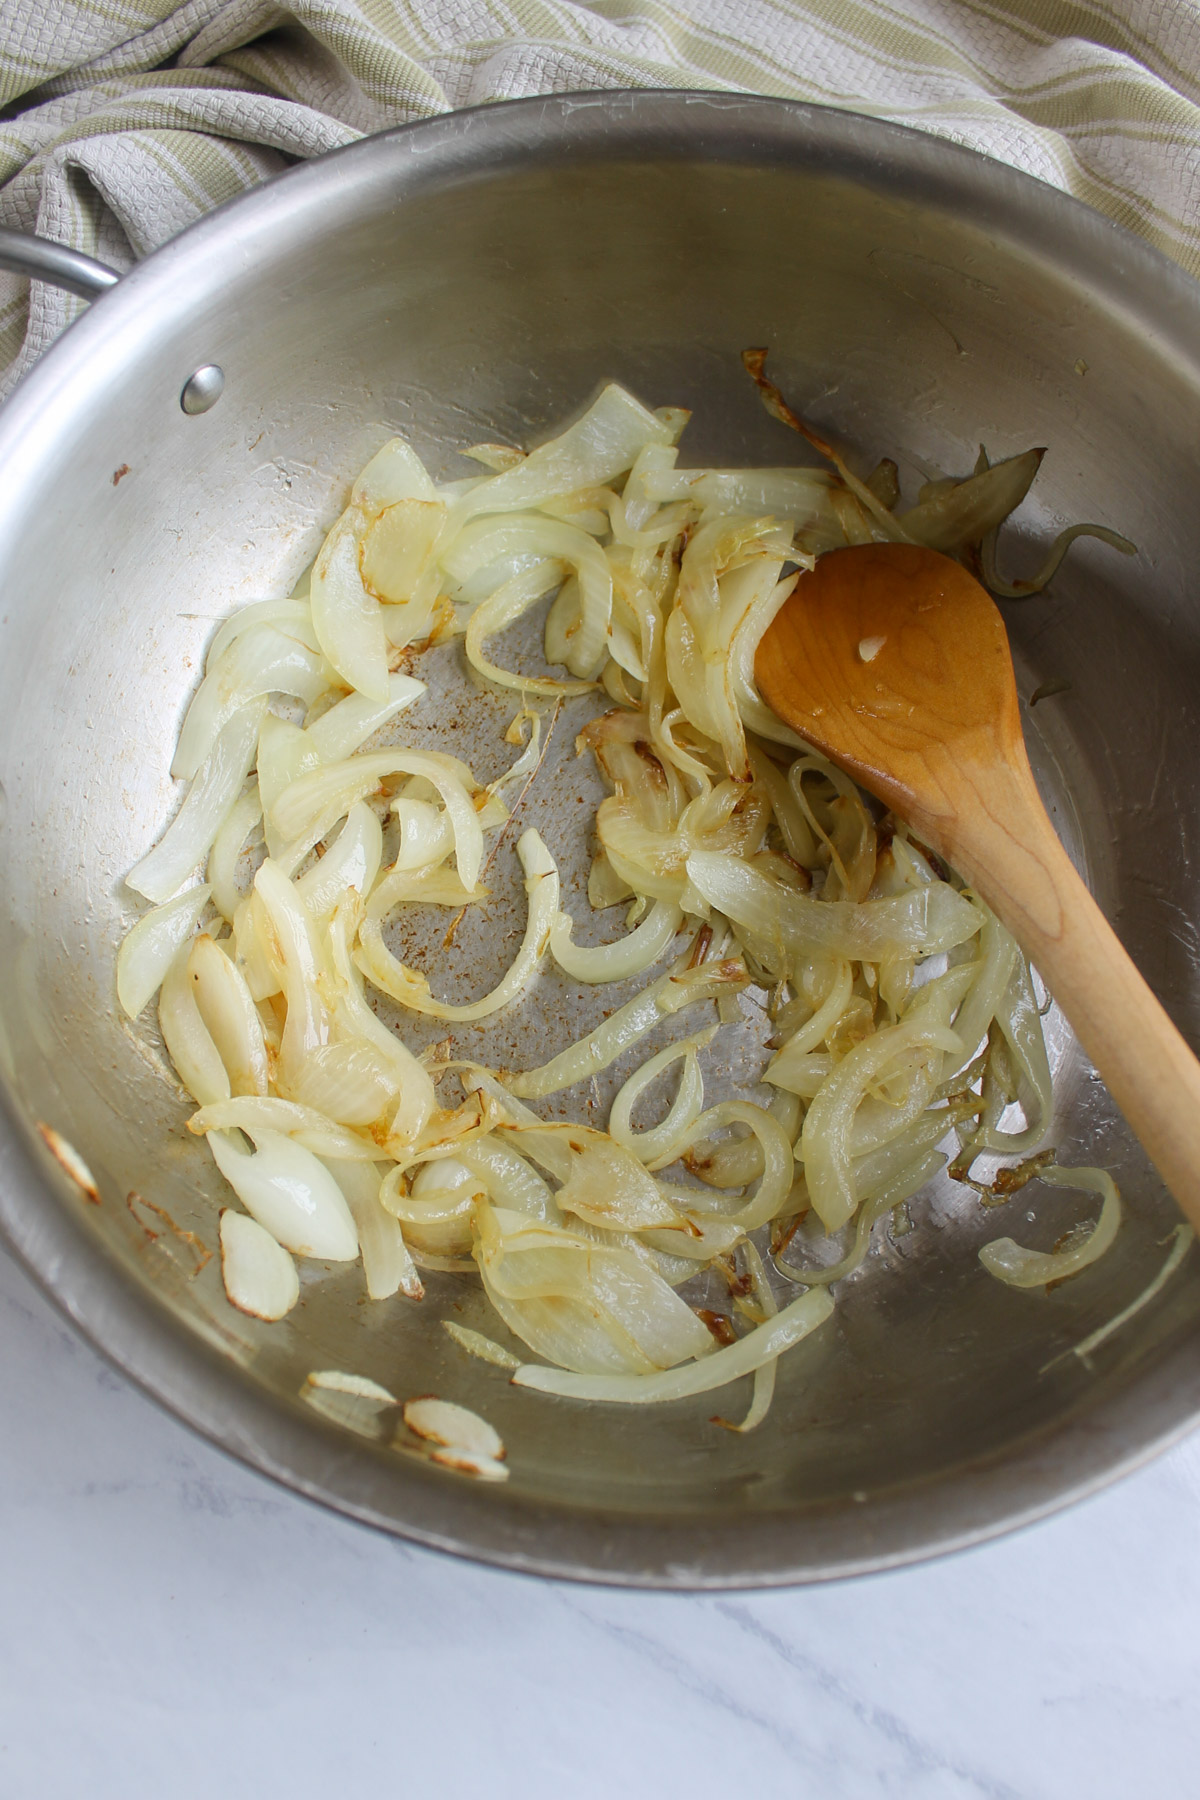 Onion slices beginning to caramelize in a skillet.